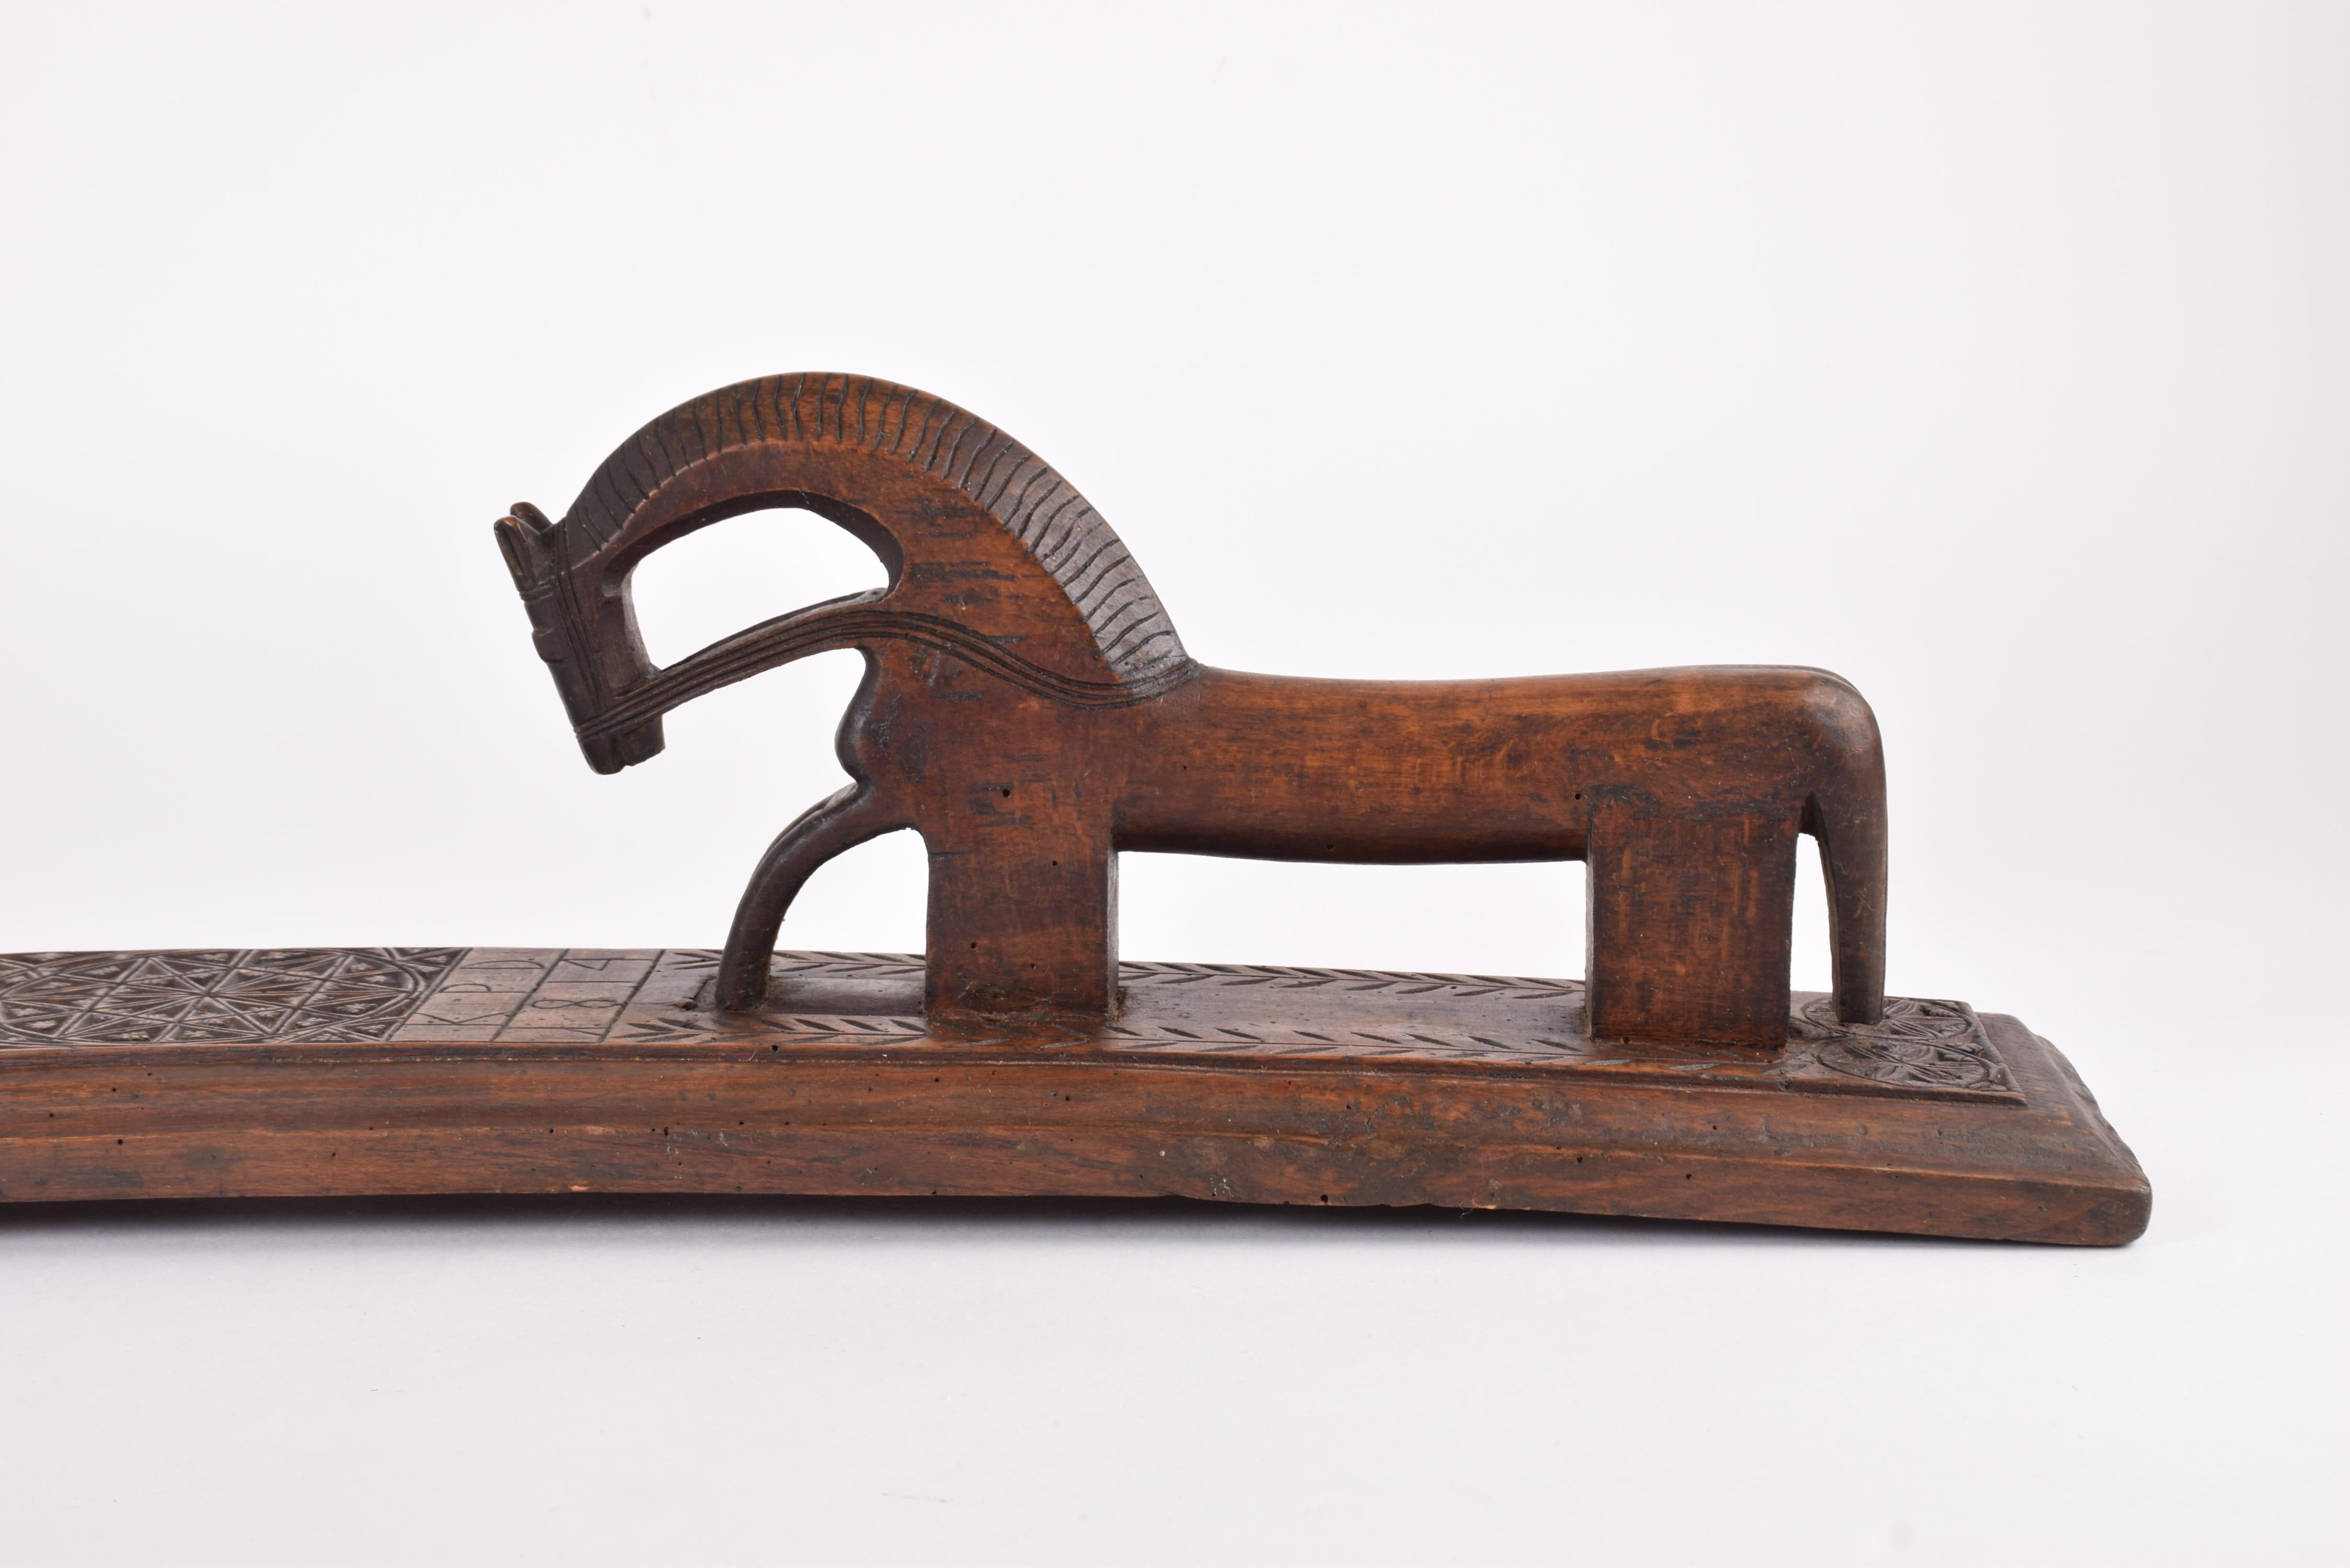 Antique Danish Wooden Mangle Board Wedding Love Gift with Horse Dated 1814 For Sale 10